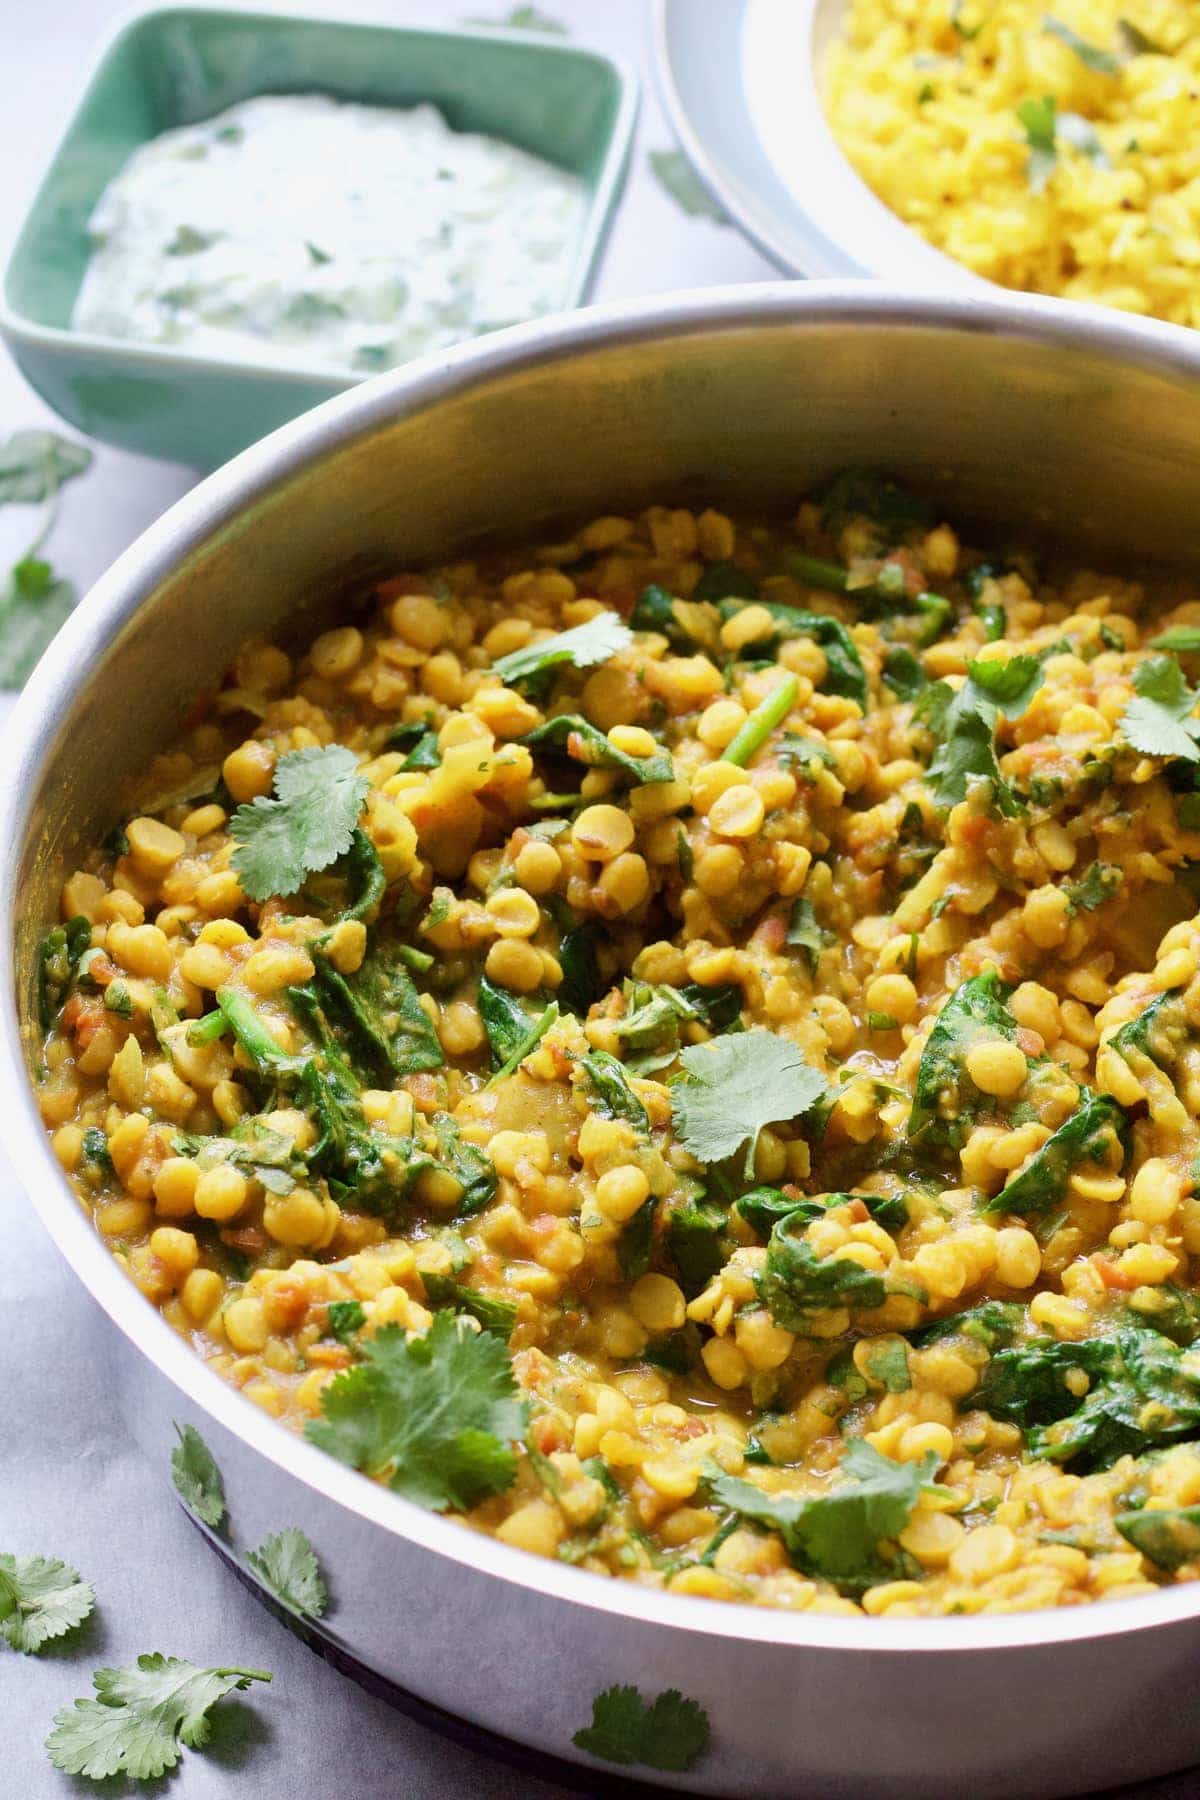 Tarka Dhal garnished with coriander in a pan.